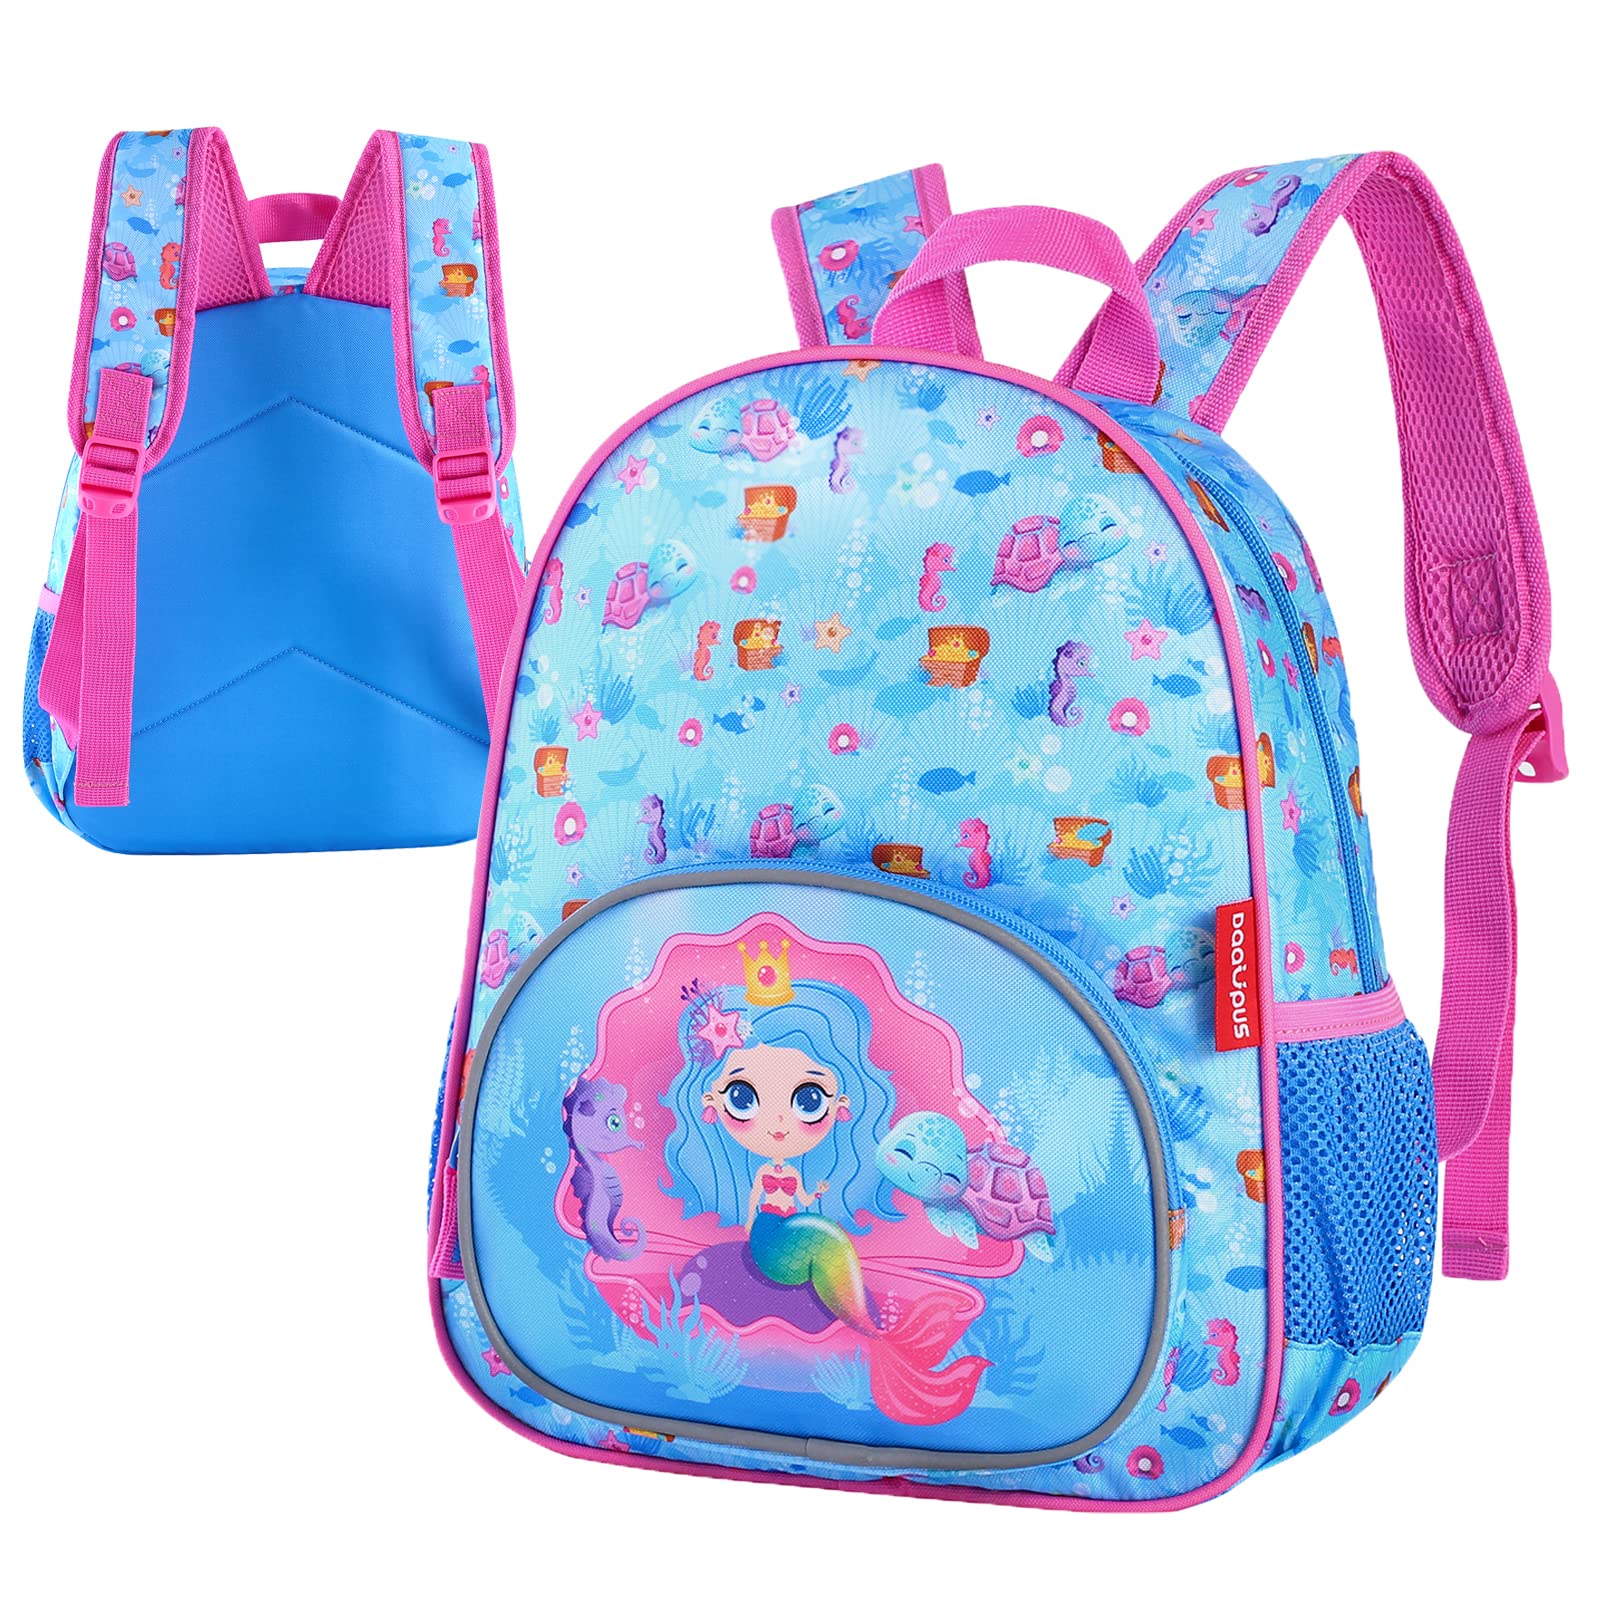 Daaupus 12-Inch girl preschool backpack,Kids Backpack for Boys & Girls, Perfect for Daycare and Preschool…